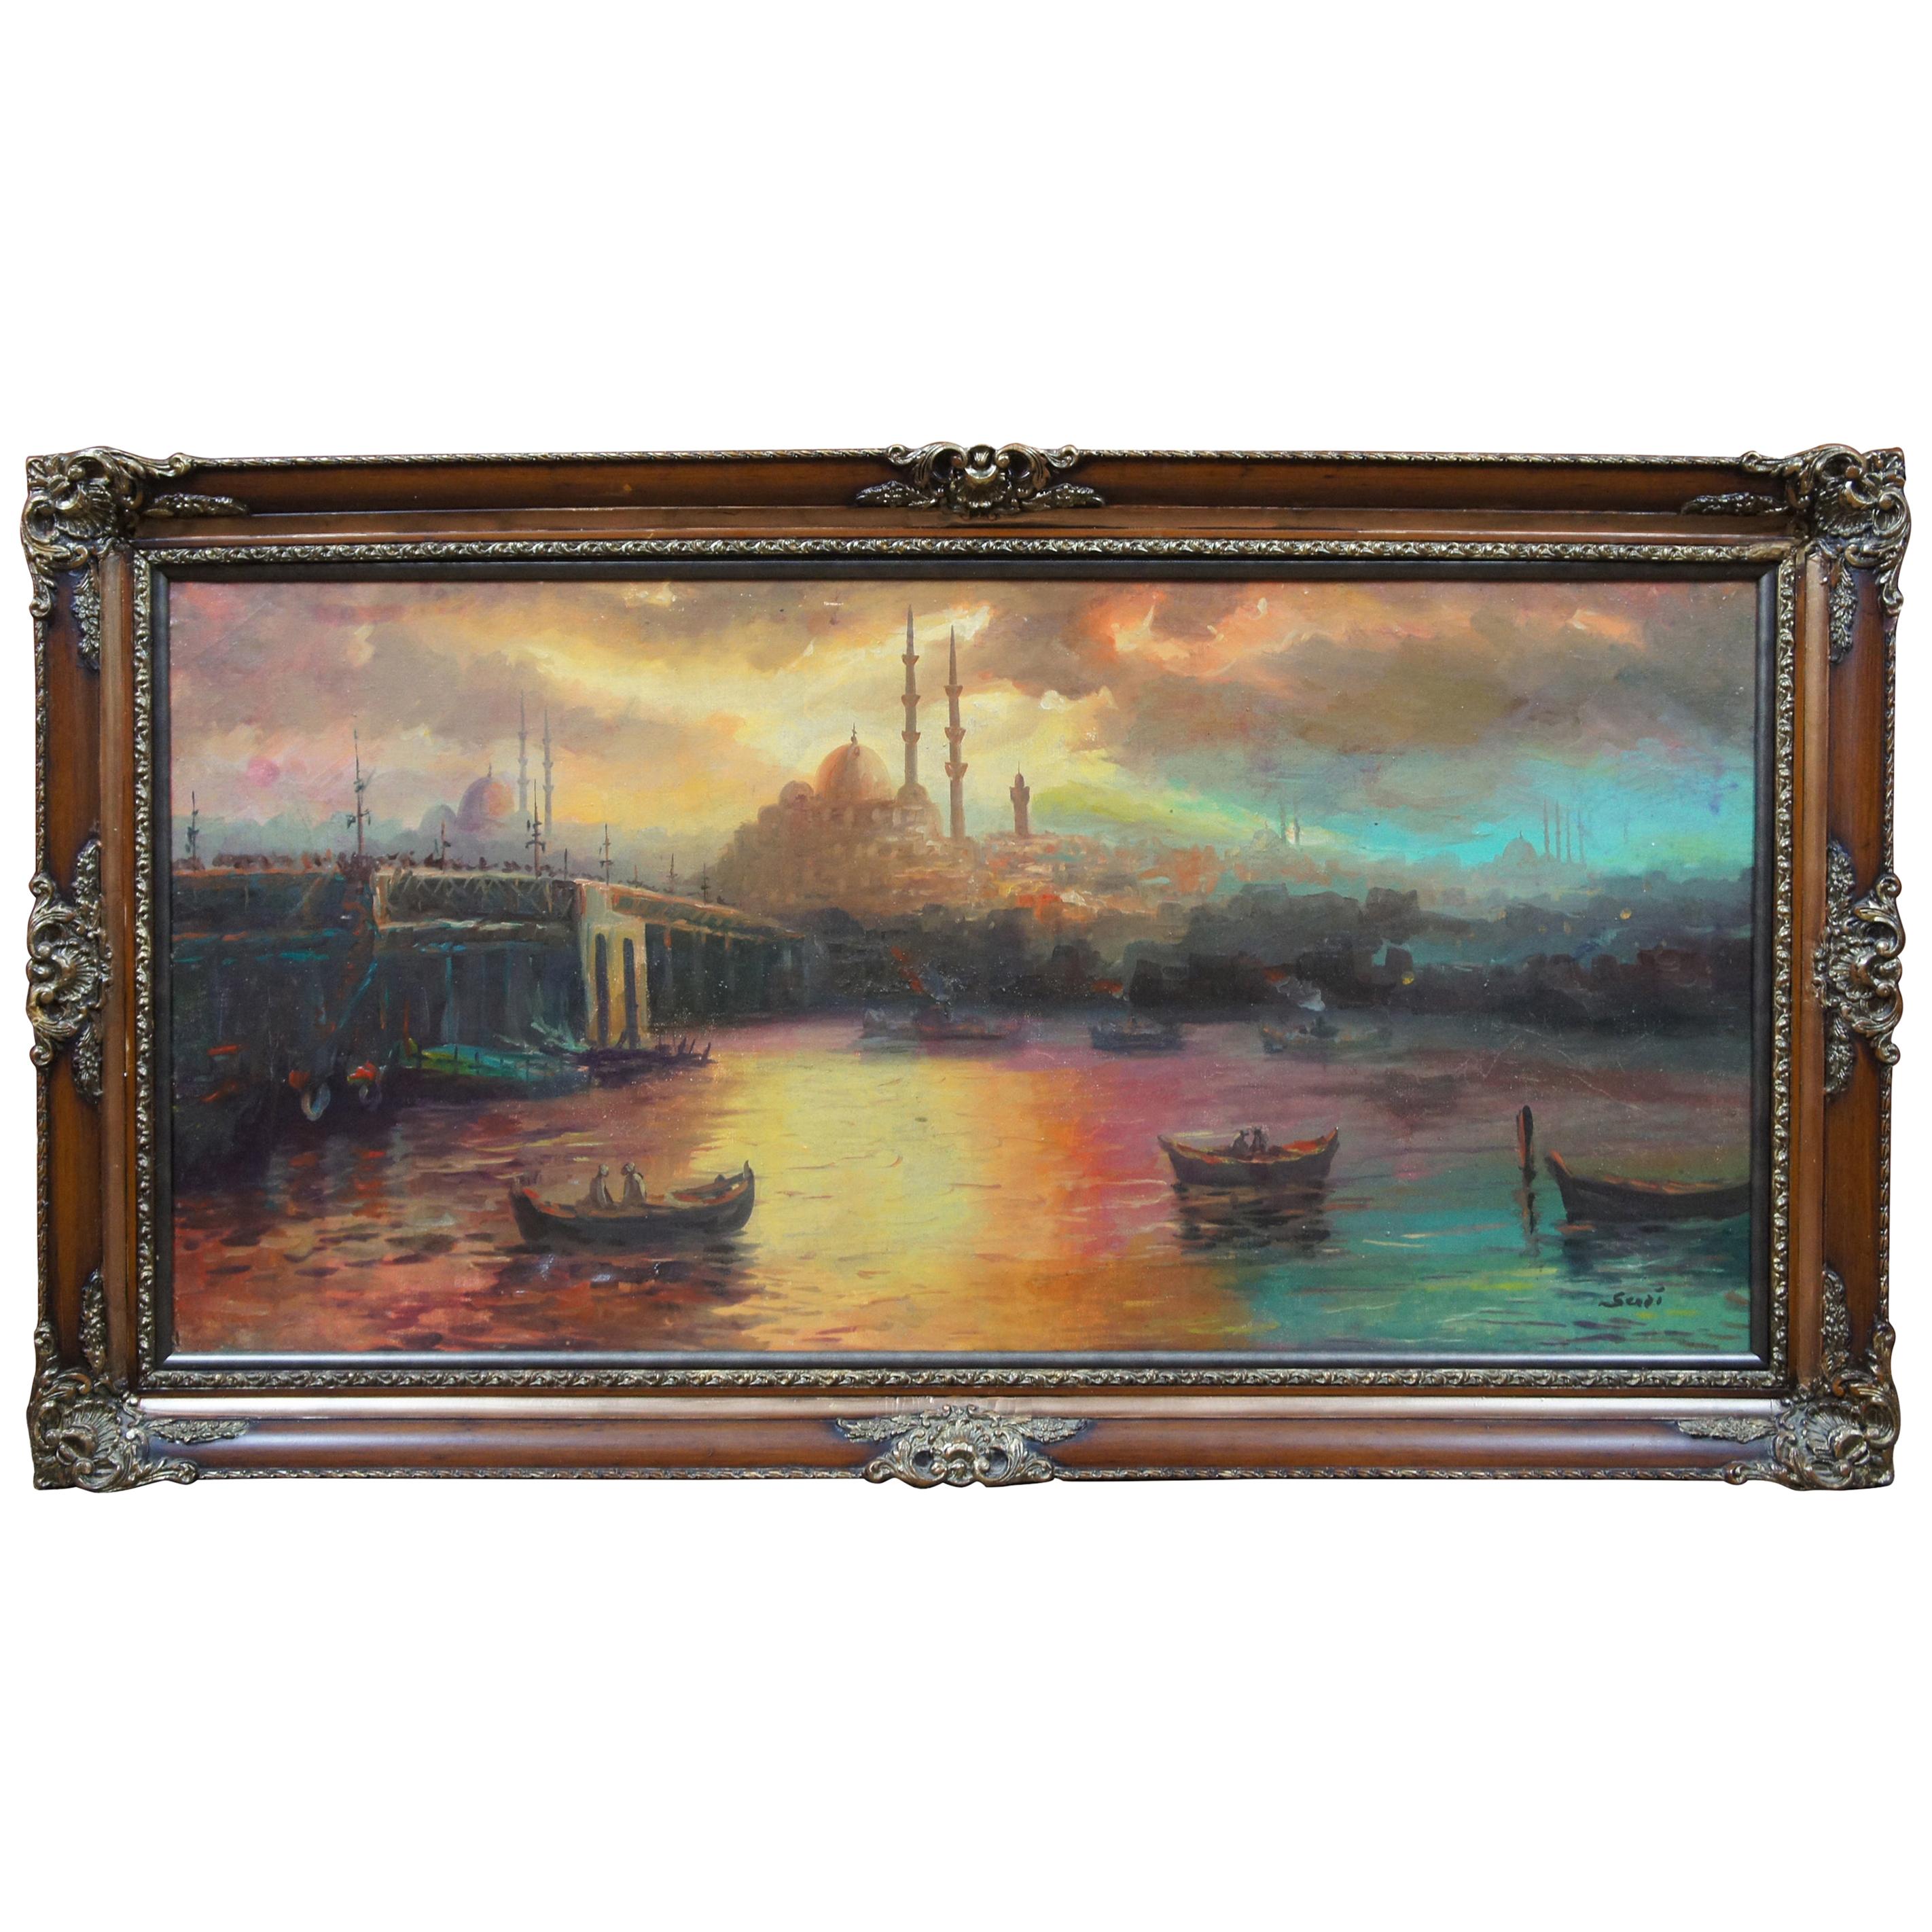 Antique Isfahan Iran Cityscape Painting Impressionist Mosque Skyline Framed